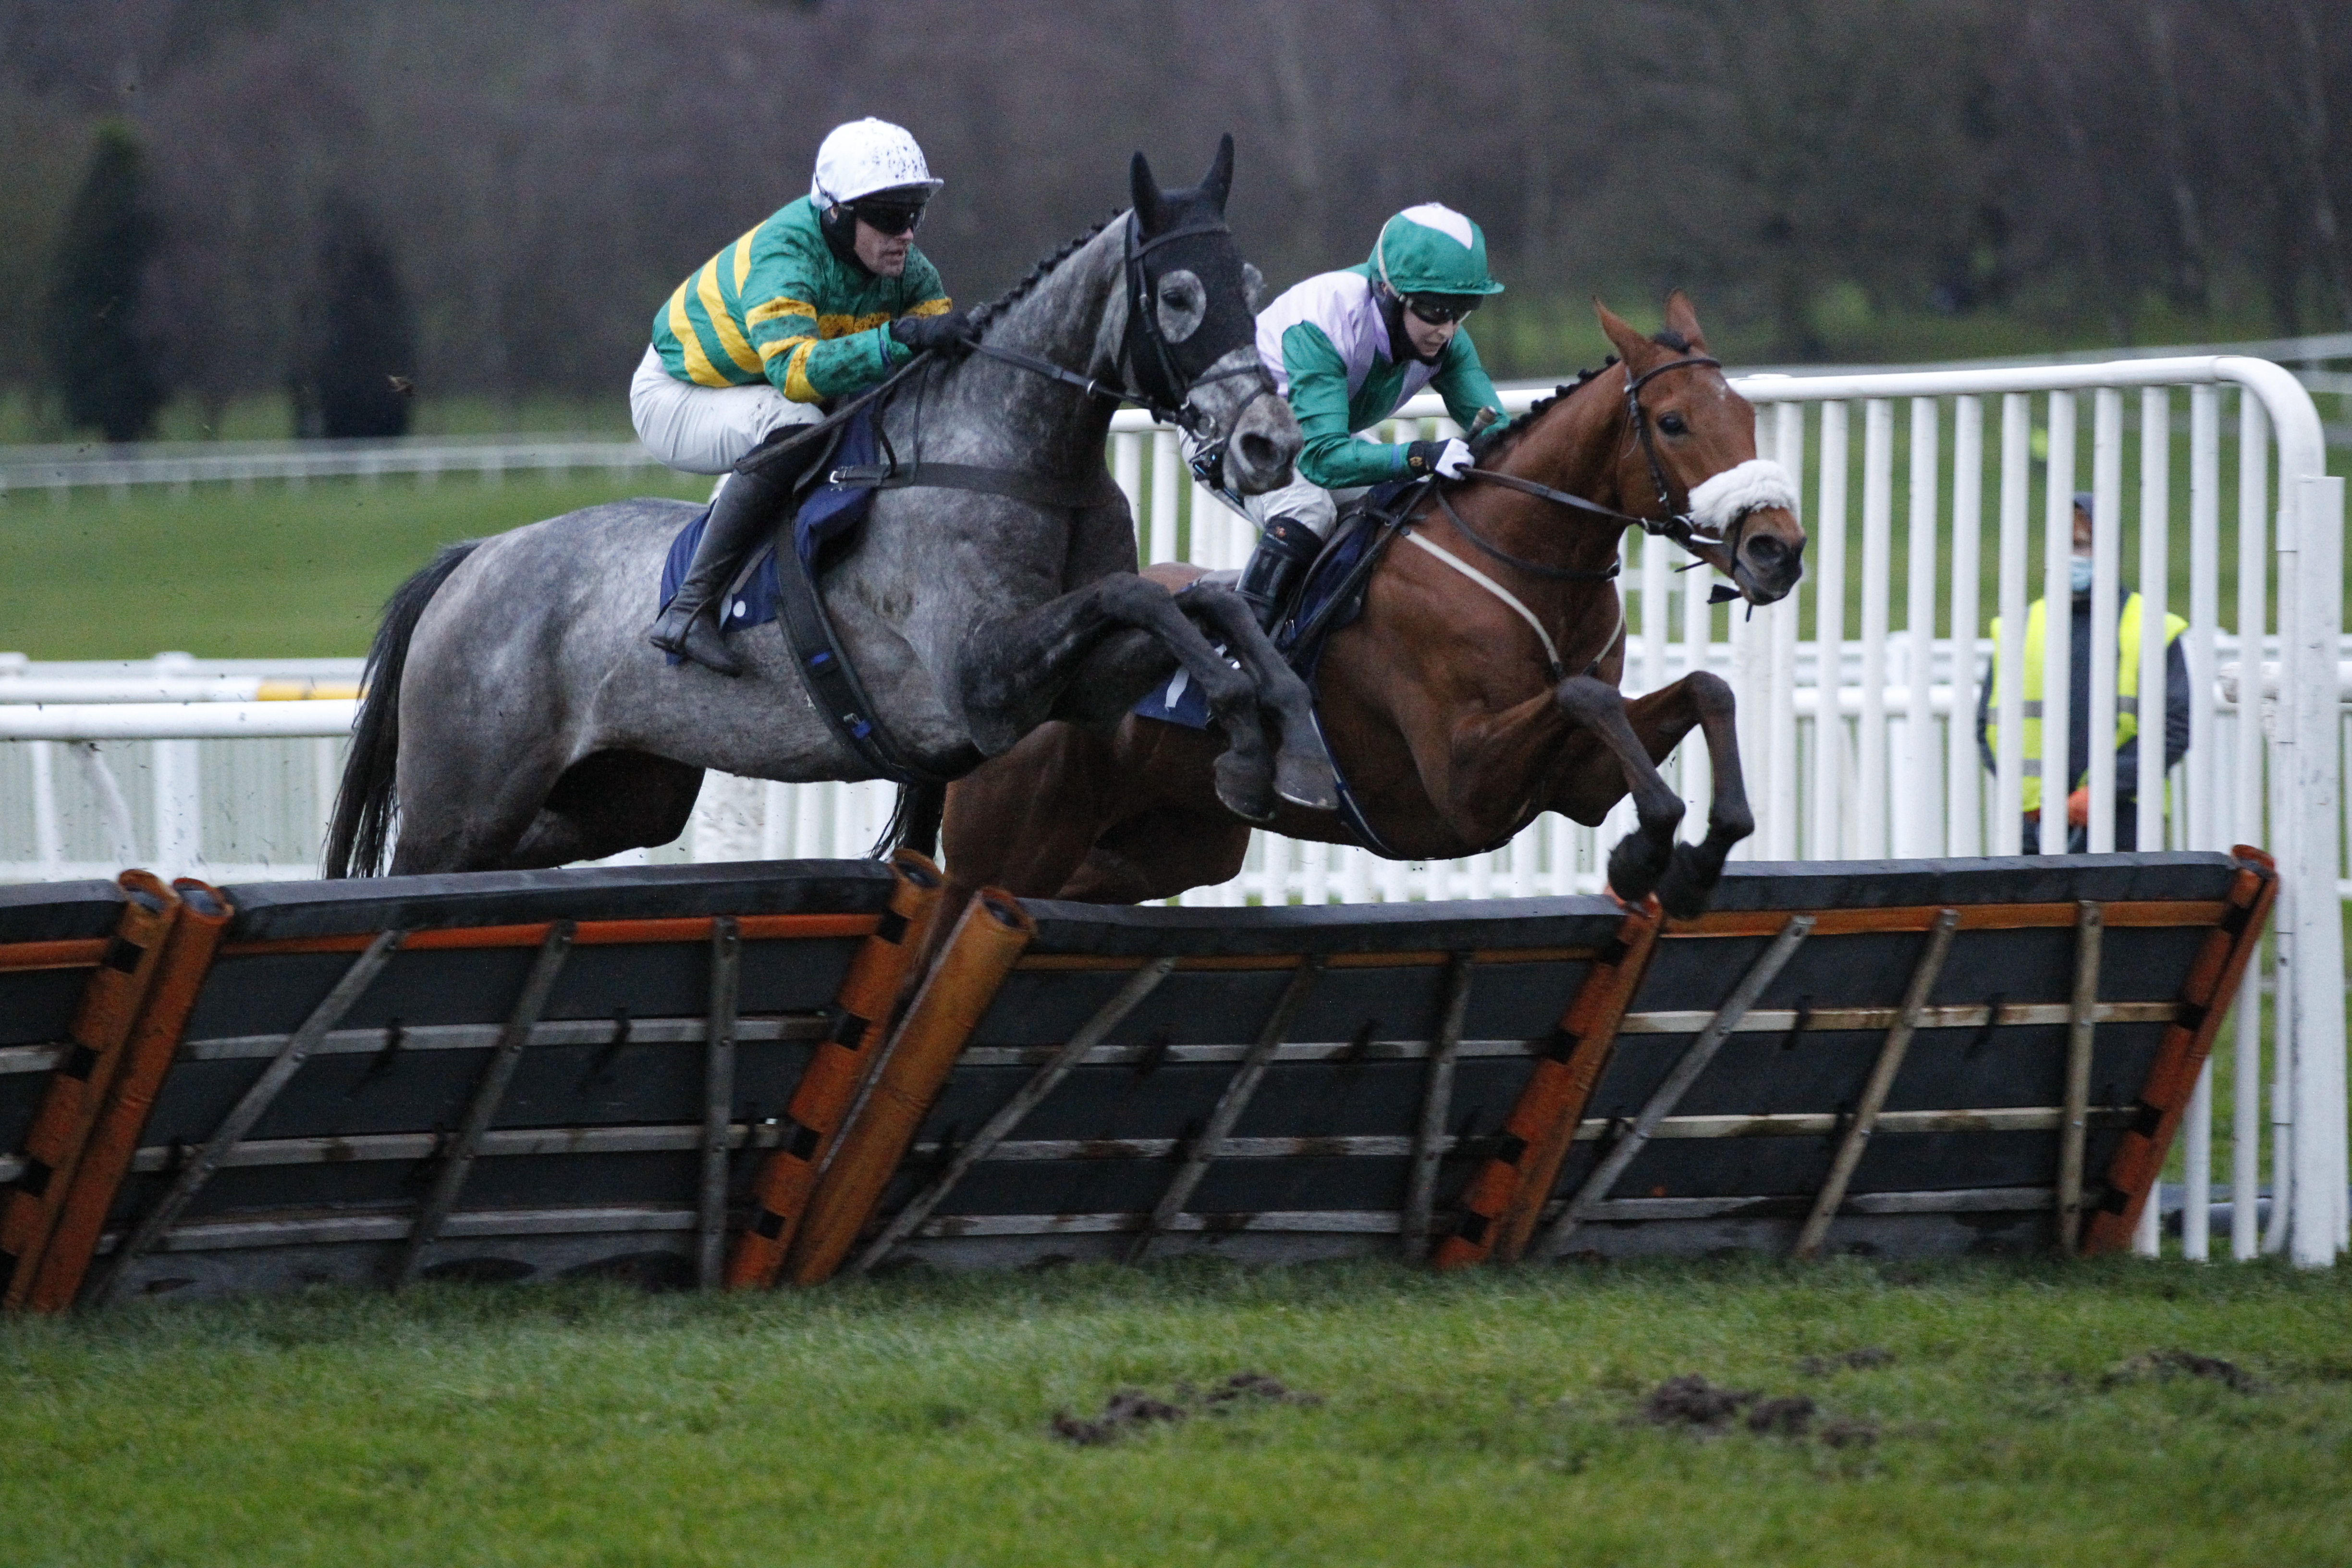 Fanfaron Dino and Richie McLernon [left] win the Sky Sports Racing Novices' Handicap Hurdle at Uttoxeter from Ragamuffin [right]. 18/12/2020 Pic Steve Davies